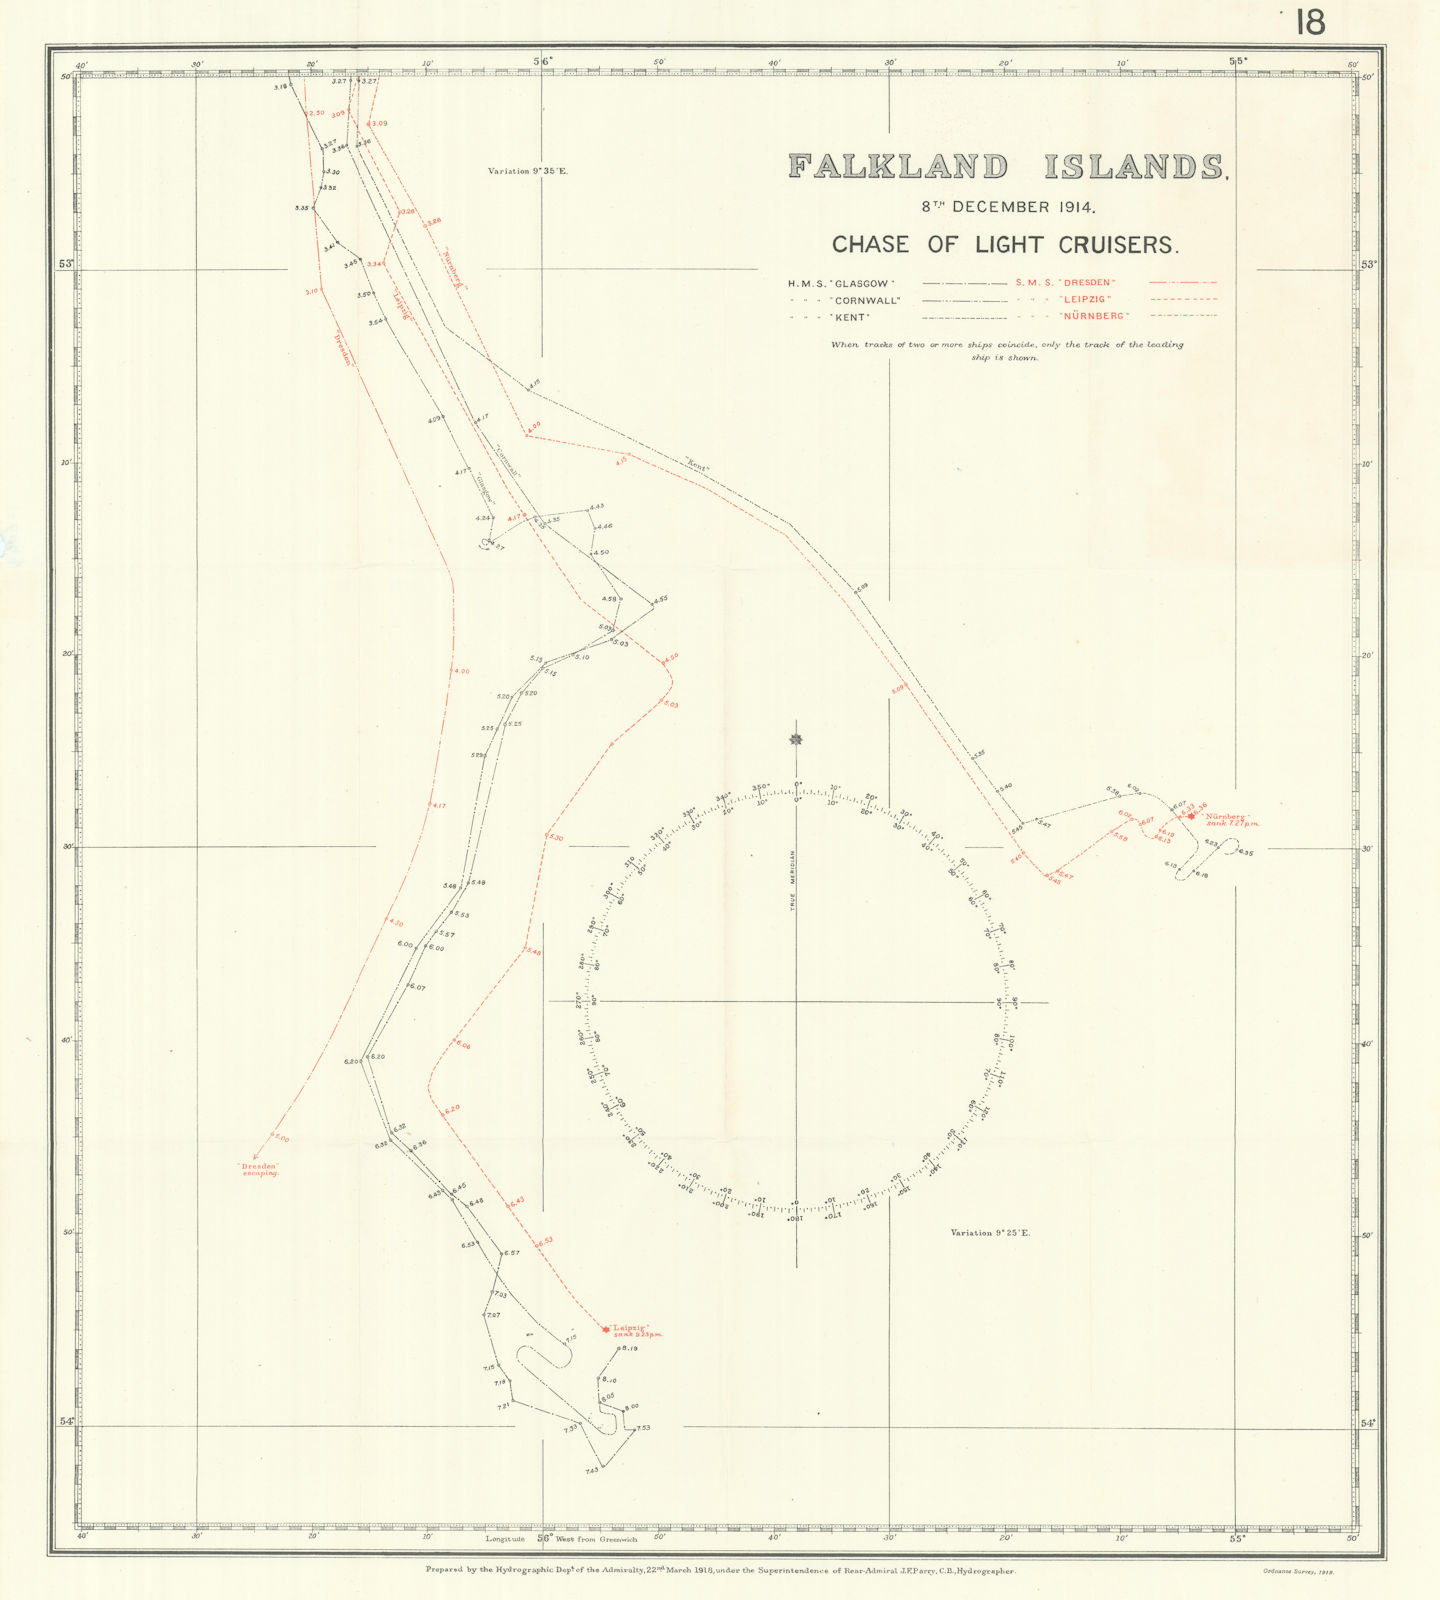 Associate Product Battle of the Falkland Islands 8th December 1914. Light Cruisers chase 1920 map